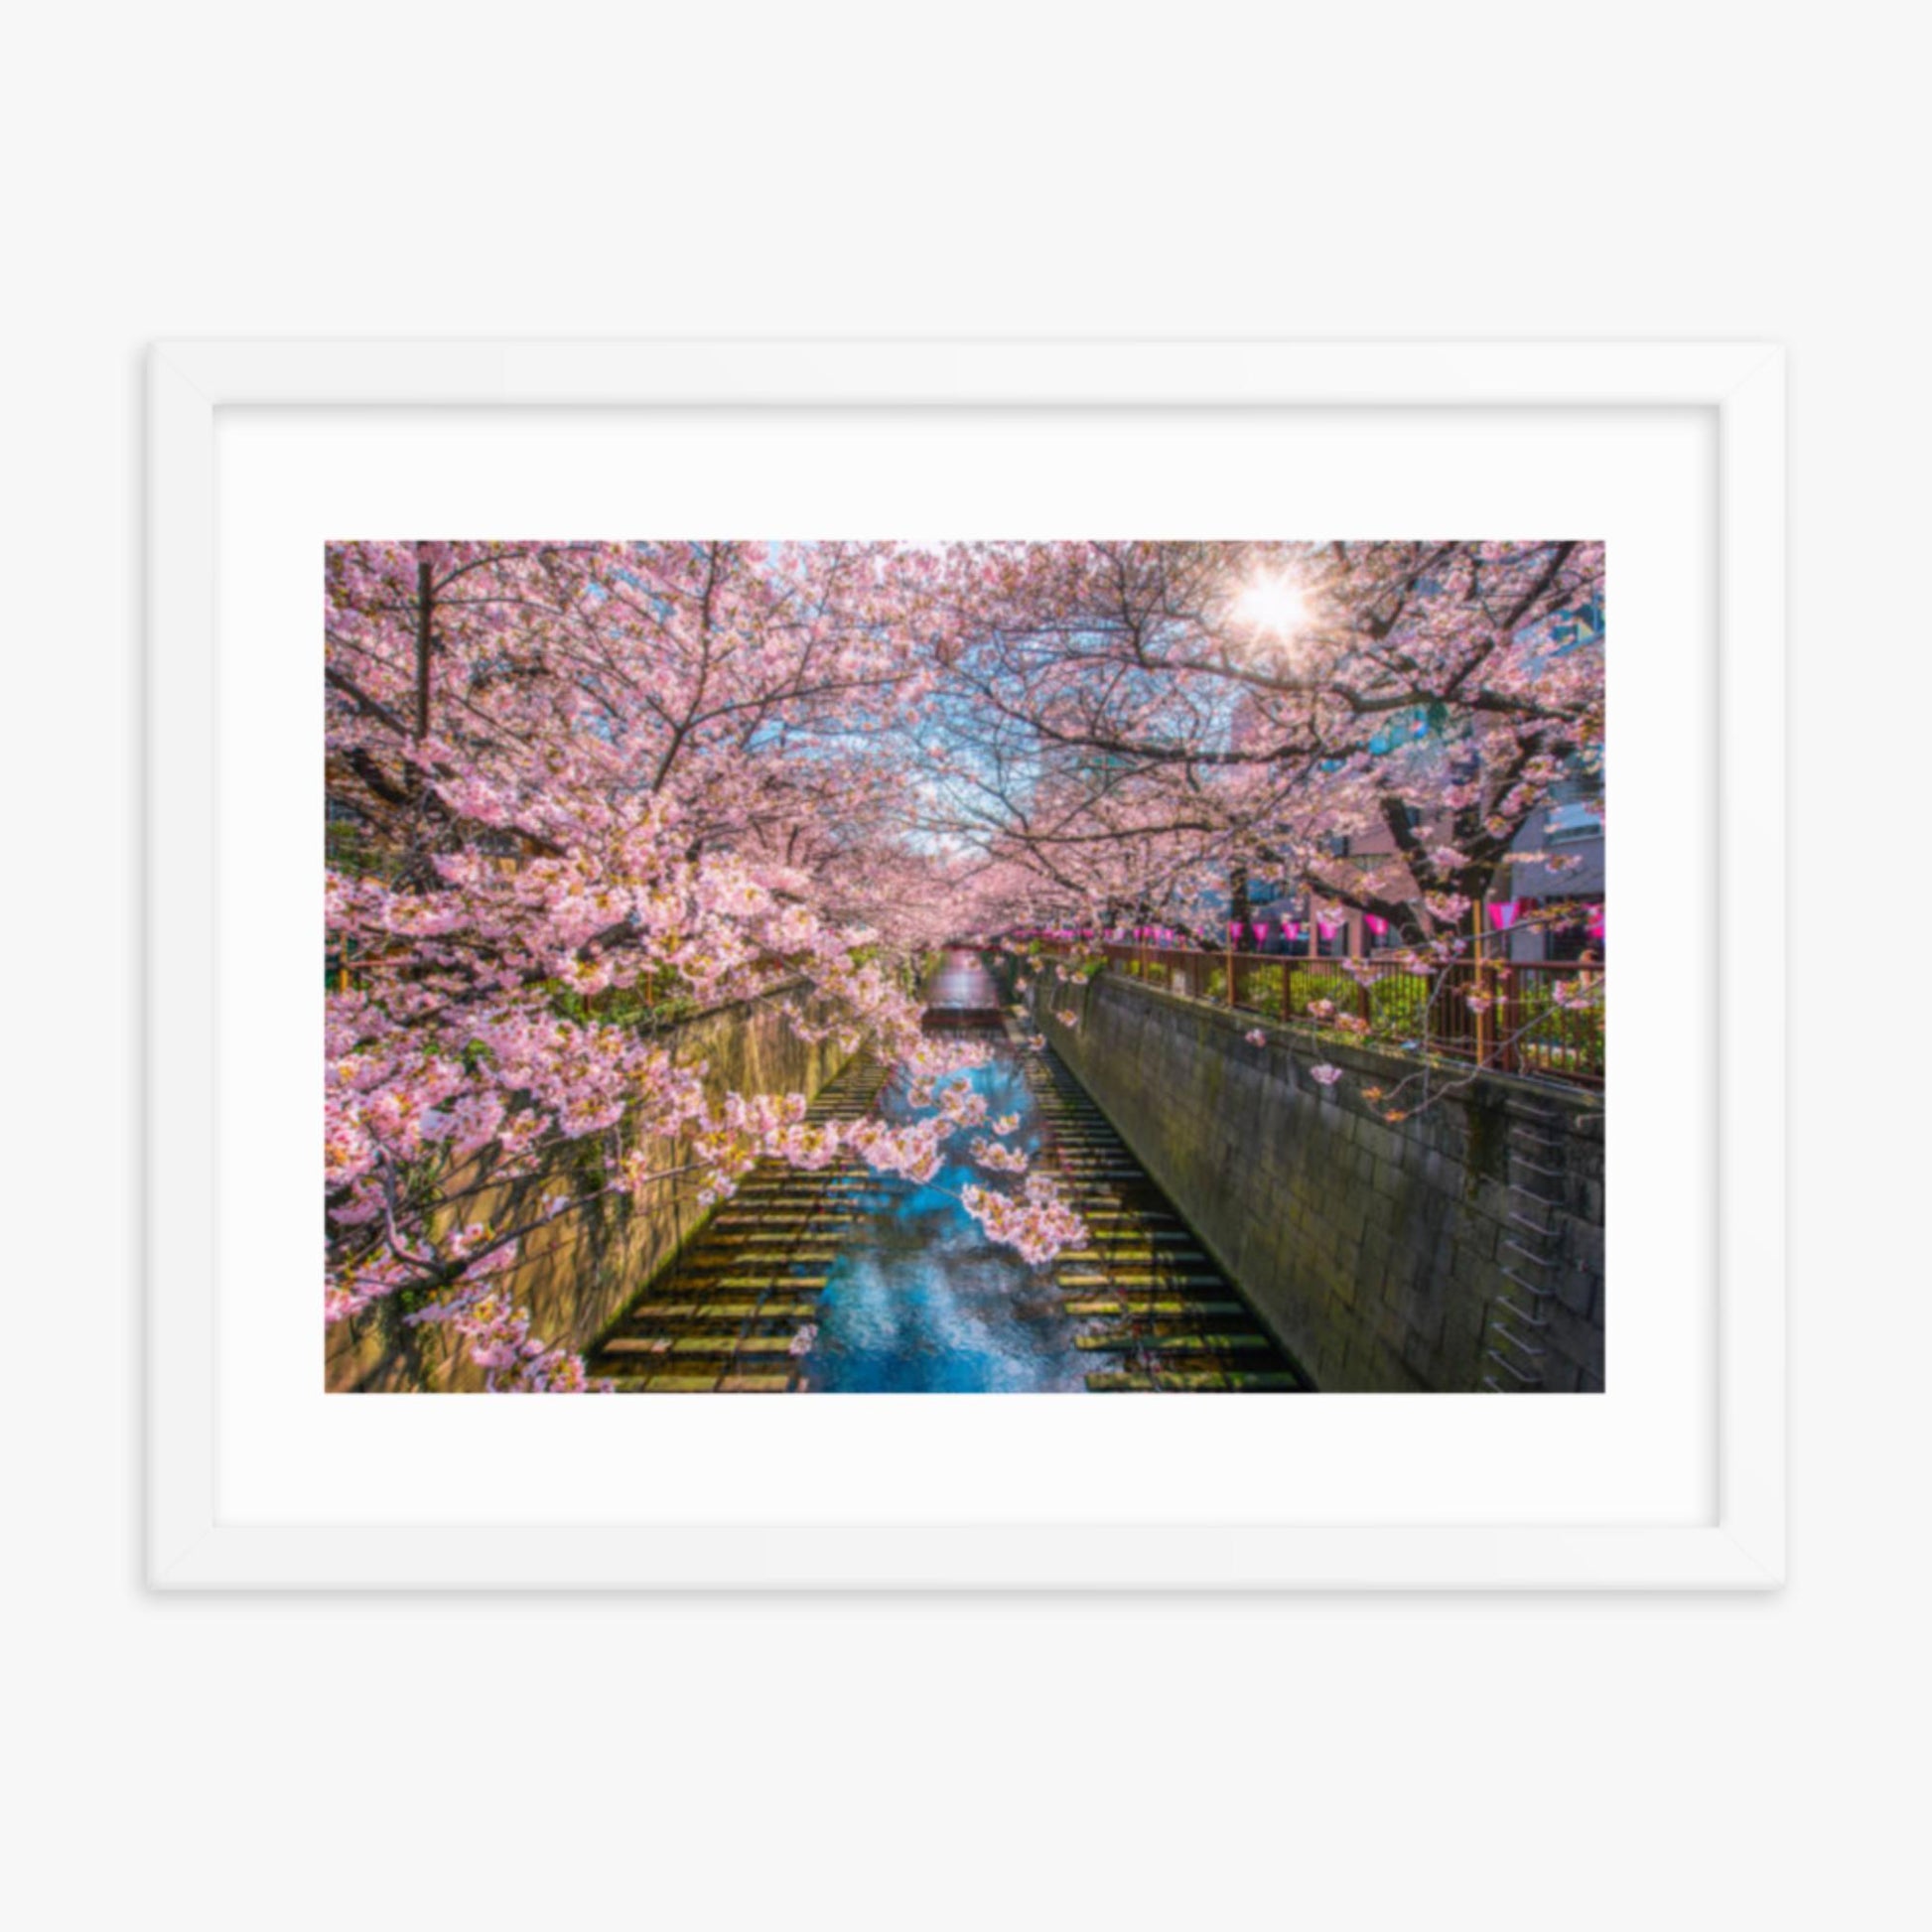 Cherry blossom sakura lined Meguro Canal in Tokyo 18x24 in Poster With White Frame